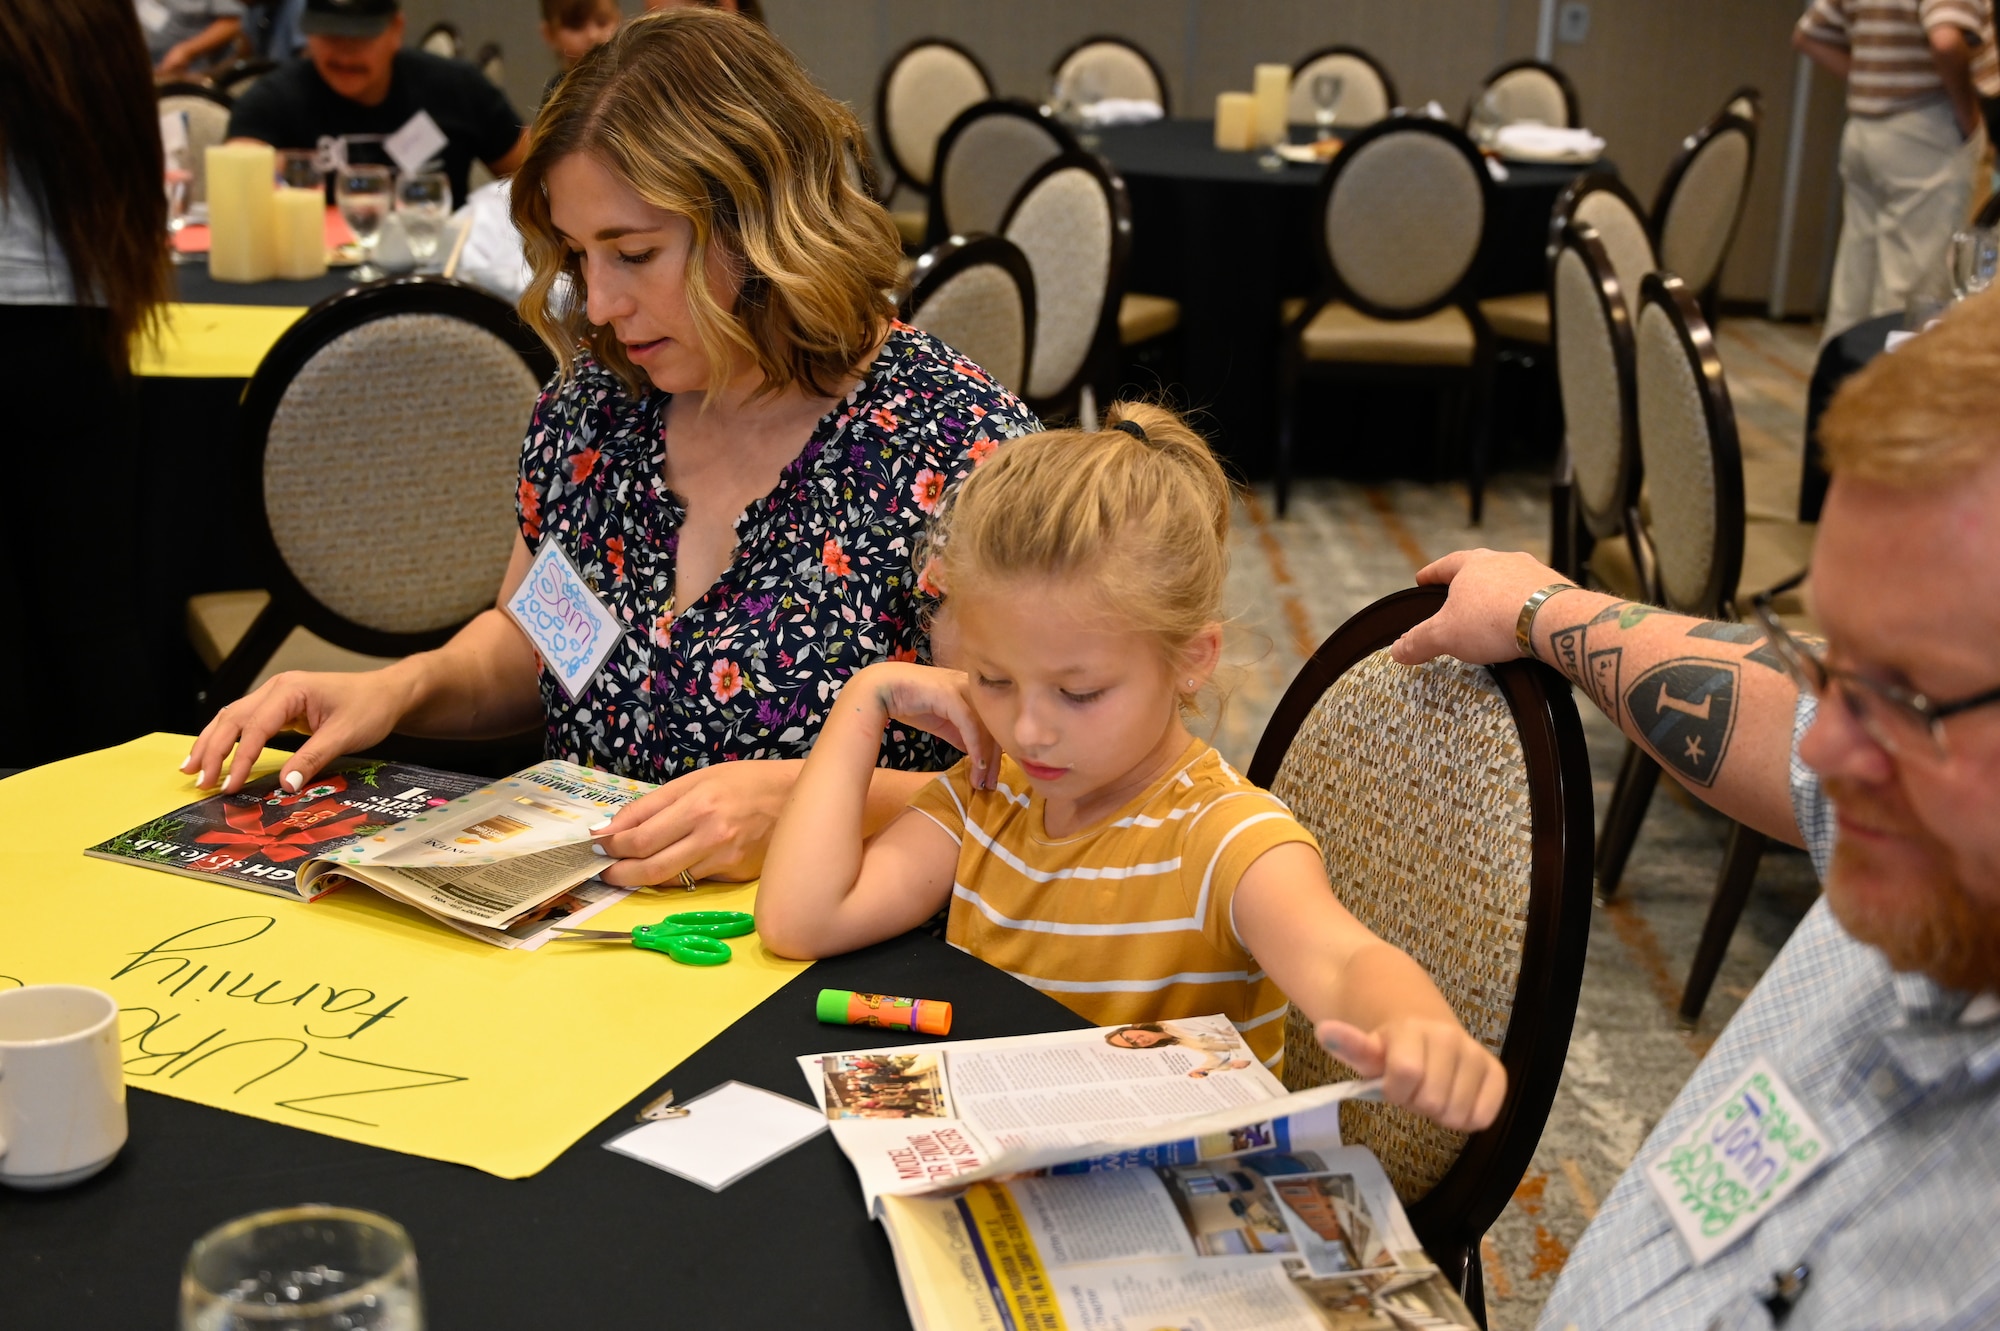 Samantha Zurcher, works on a family craft with her husband and daughter at the Strong Bonds Family event